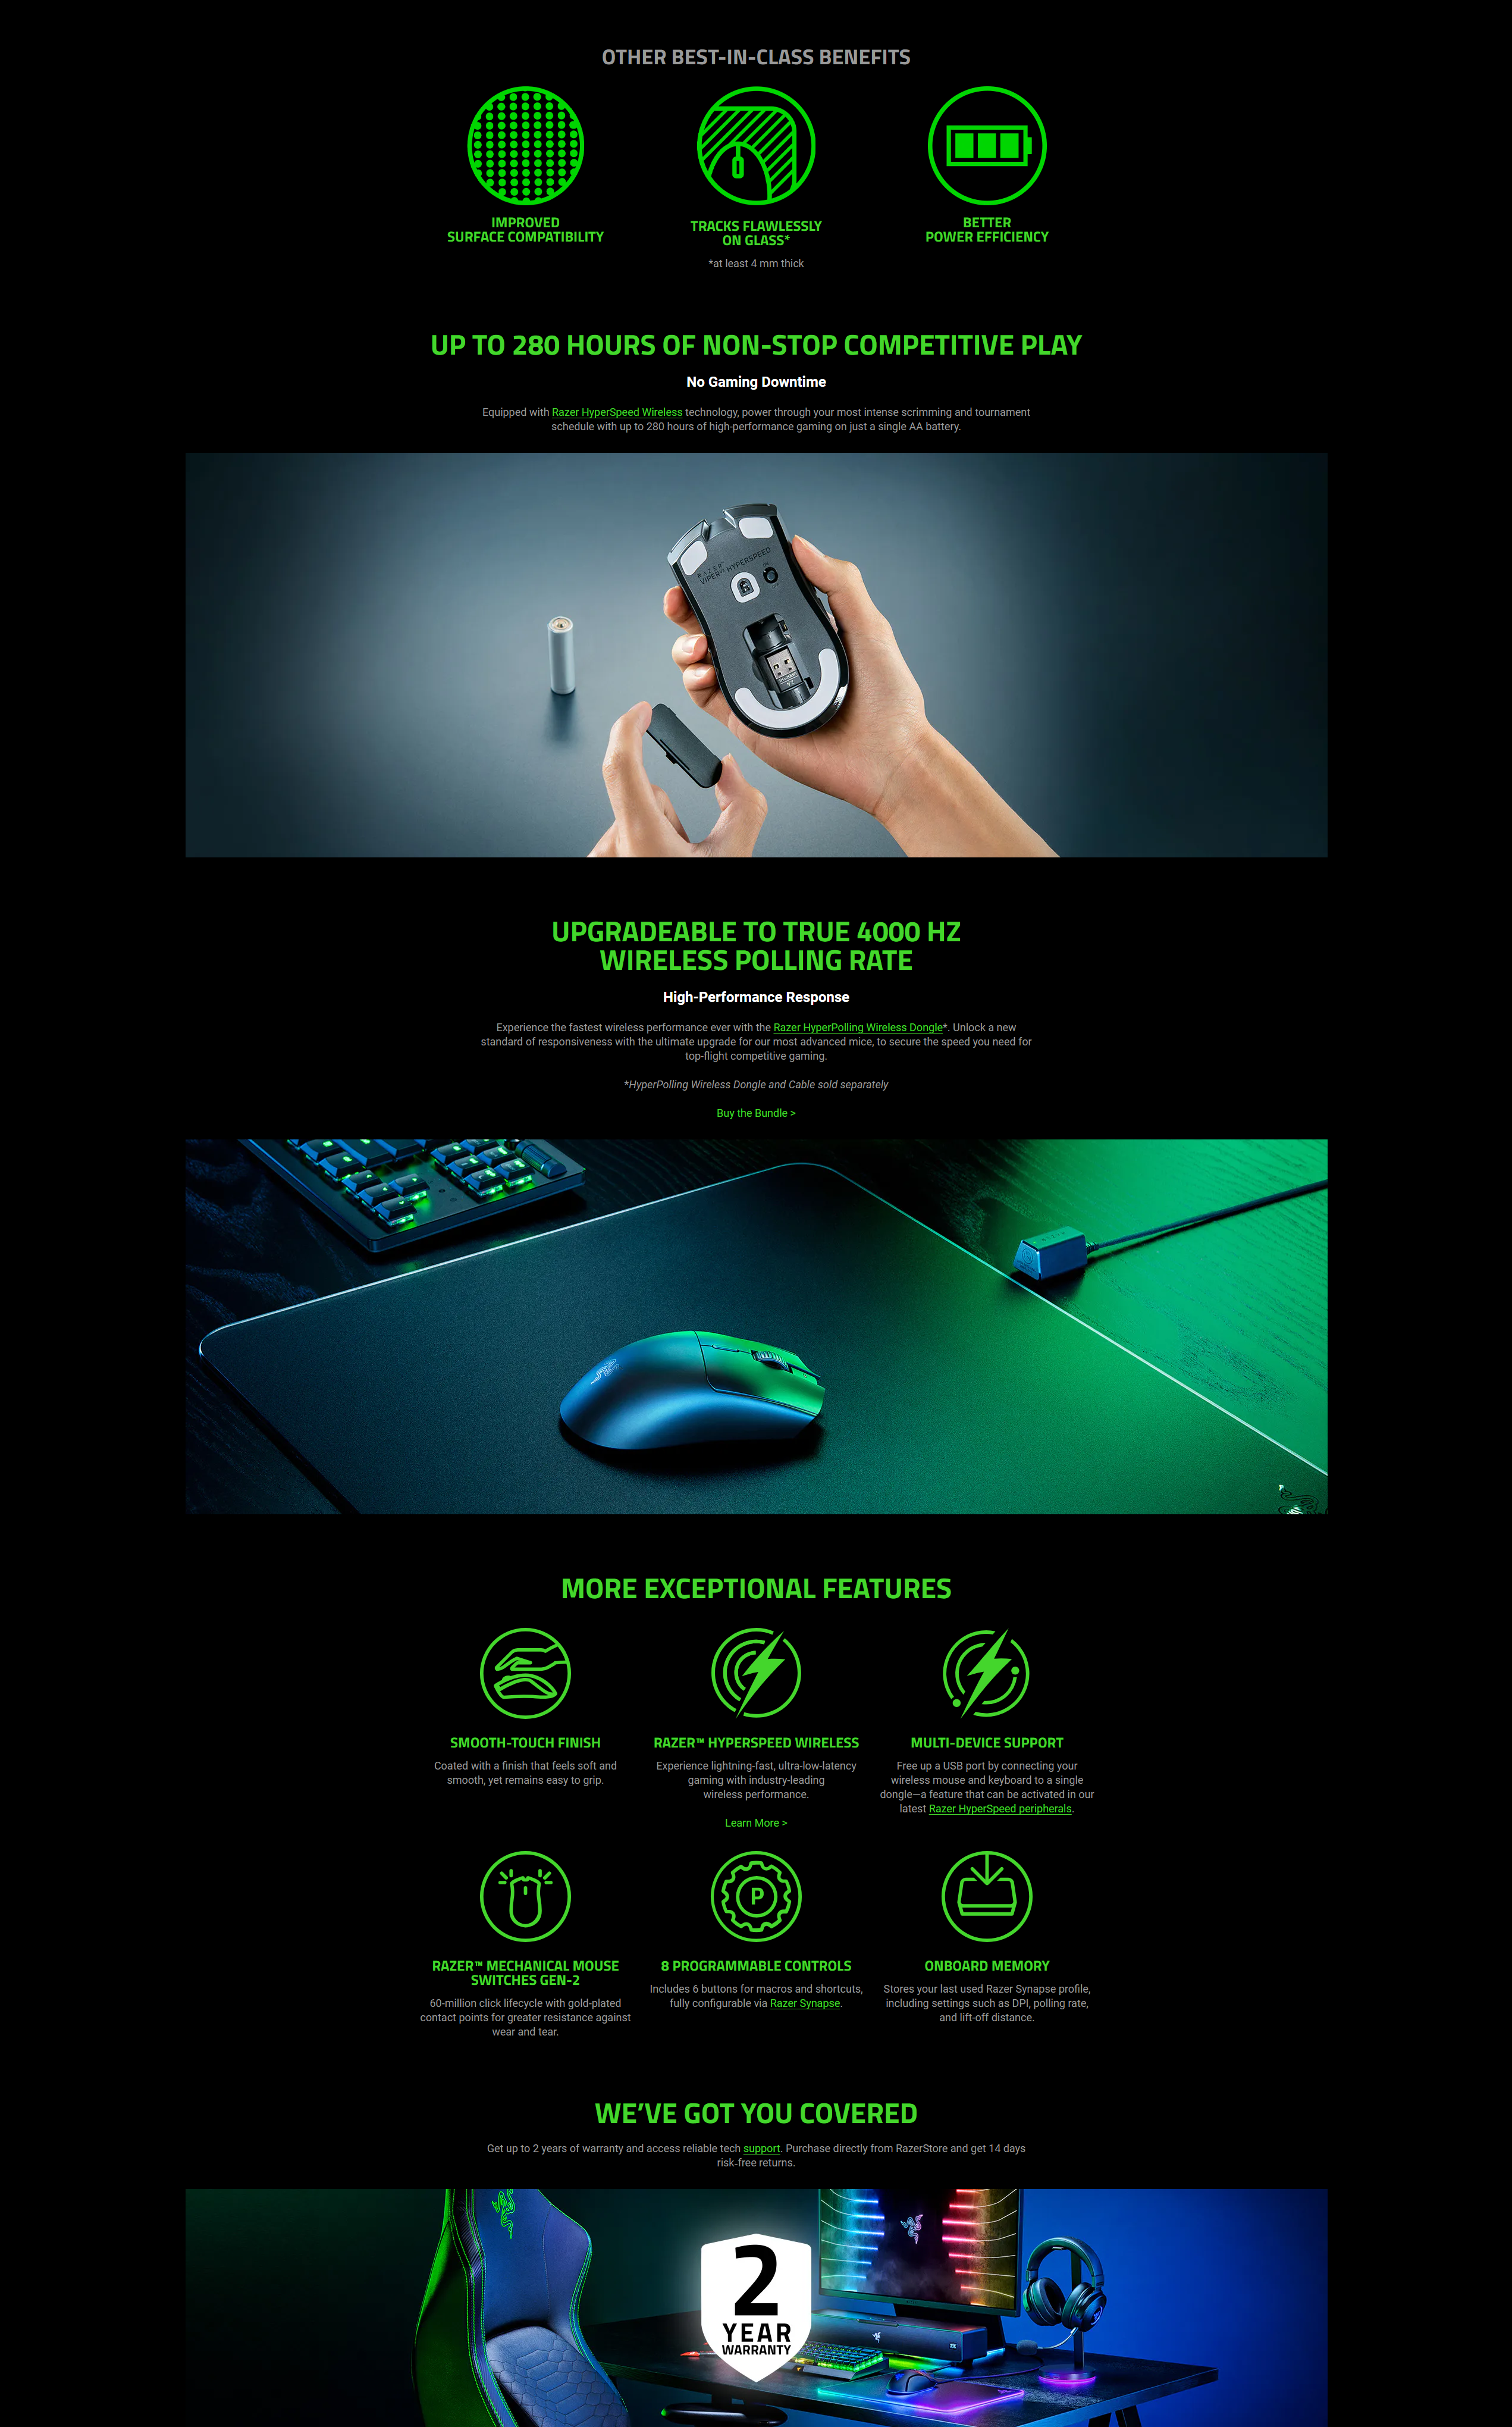 A large marketing image providing additional information about the product Razer Viper V3 HyperSpeed - Wireless eSports Gaming Mouse - Additional alt info not provided